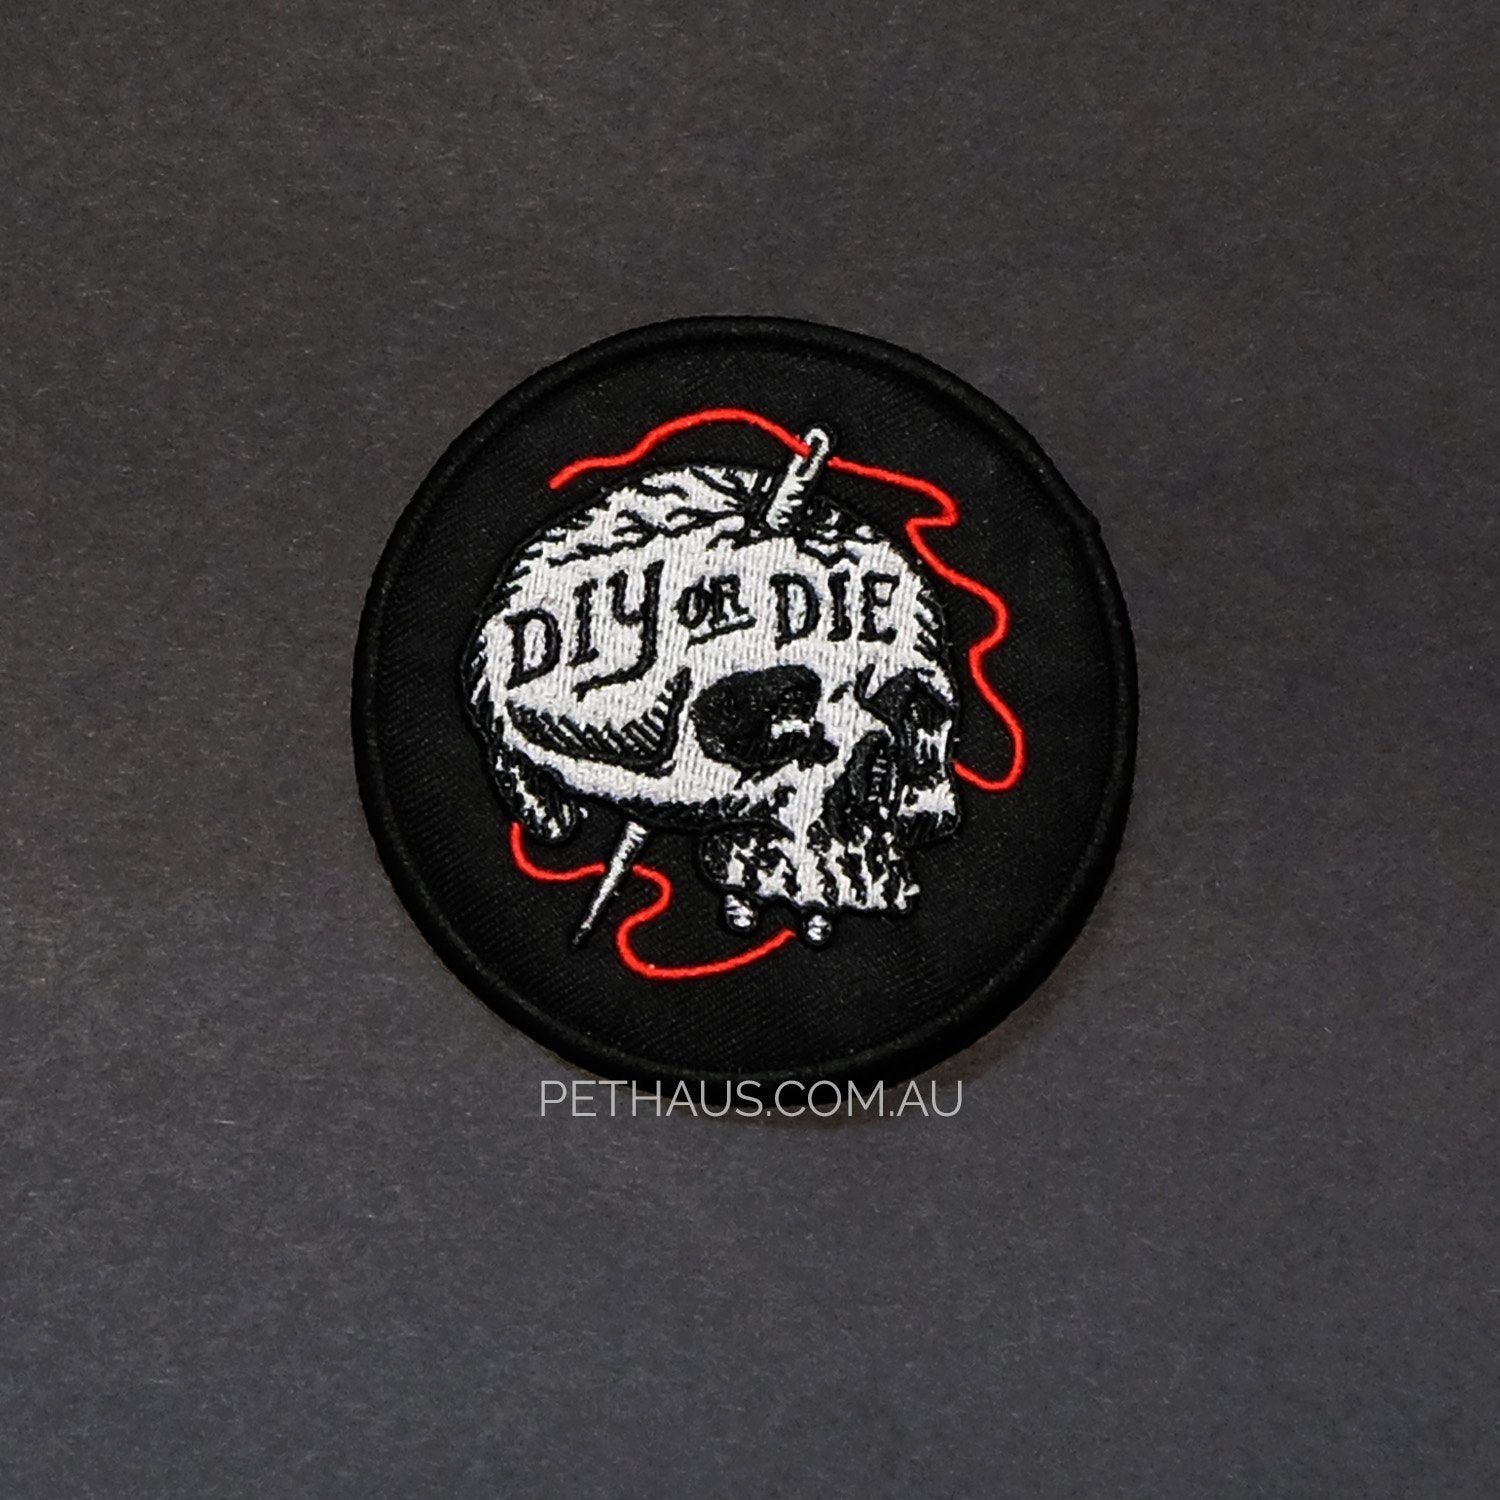 D.I.Y Or Die Patch, Skull patch, Makers Patch, cool embroidered patch